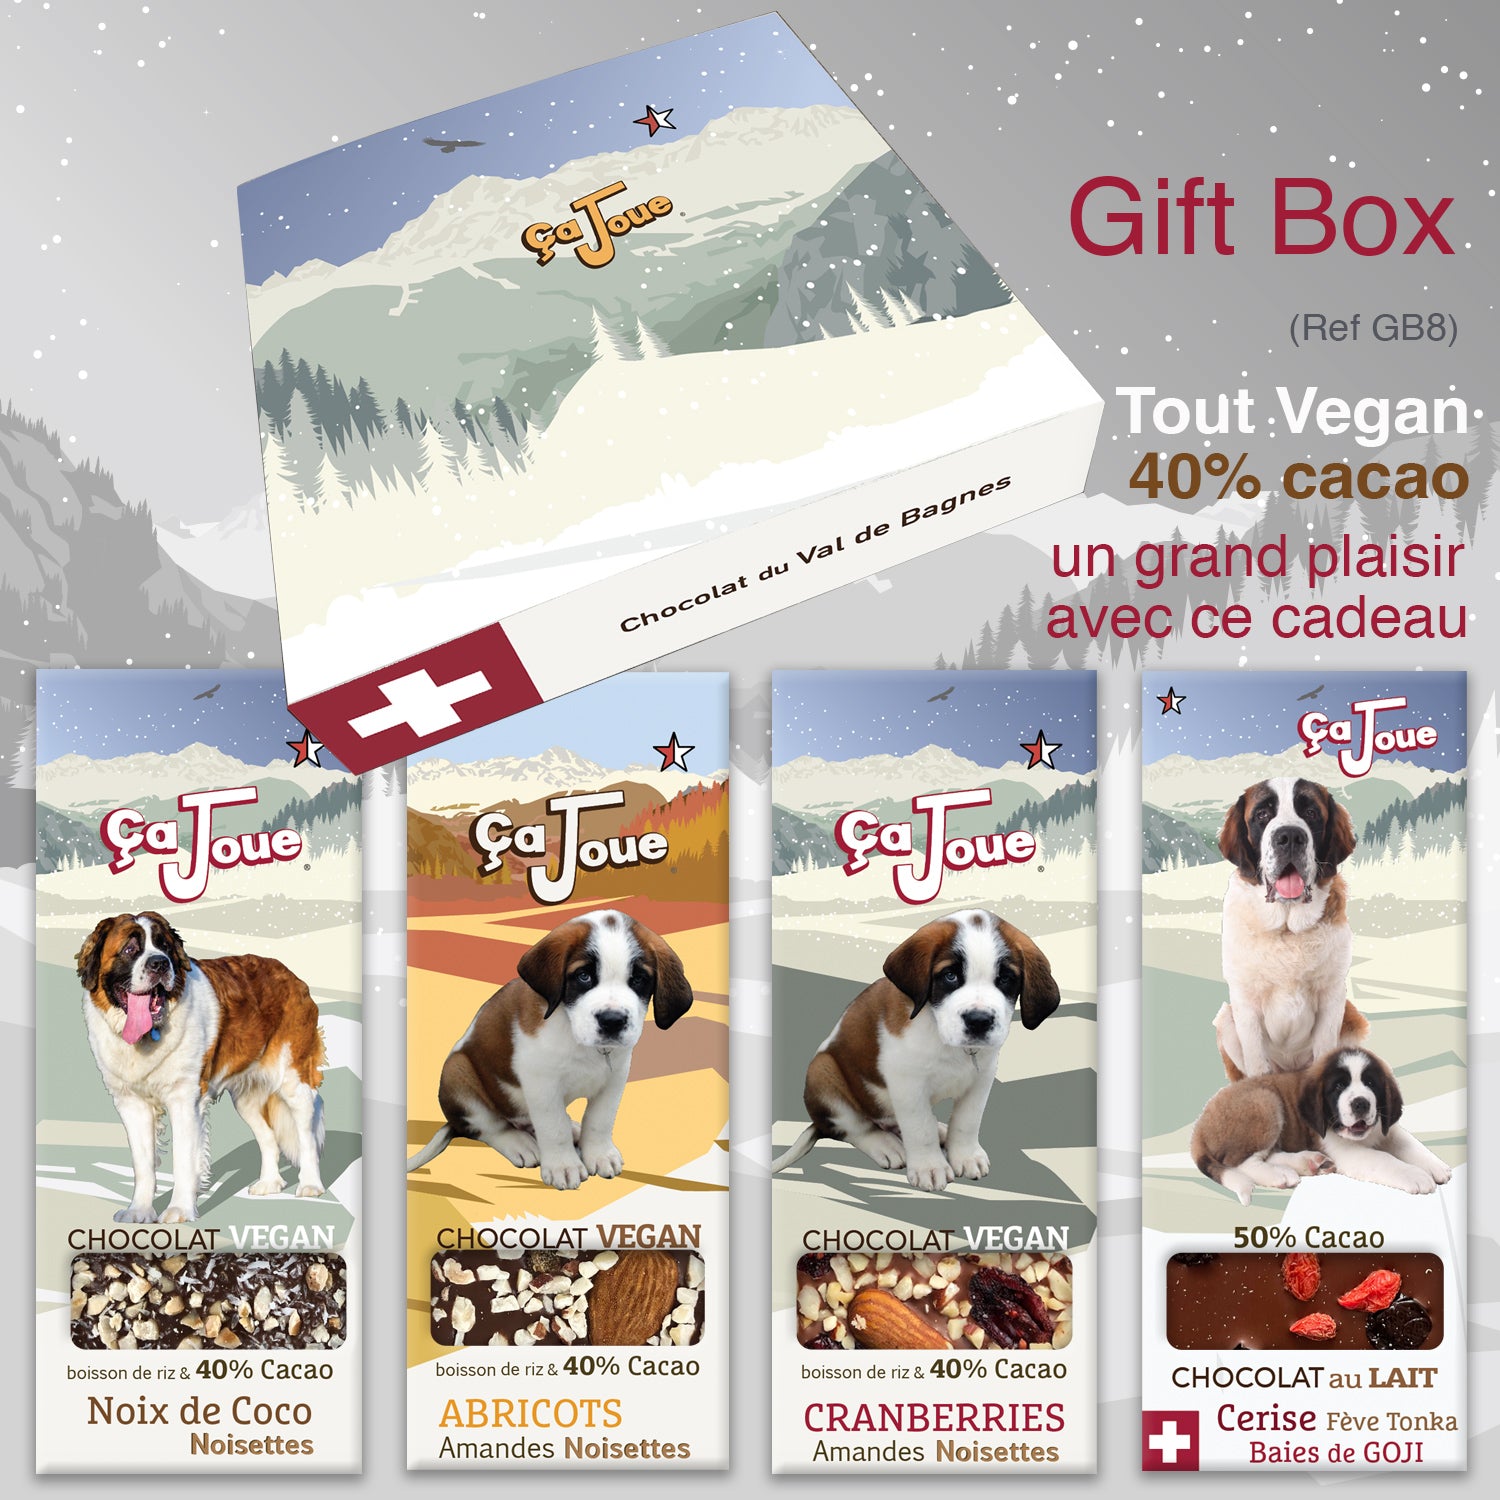 Gift Box (Ref GB8) Chocolate from Val de Bagnes